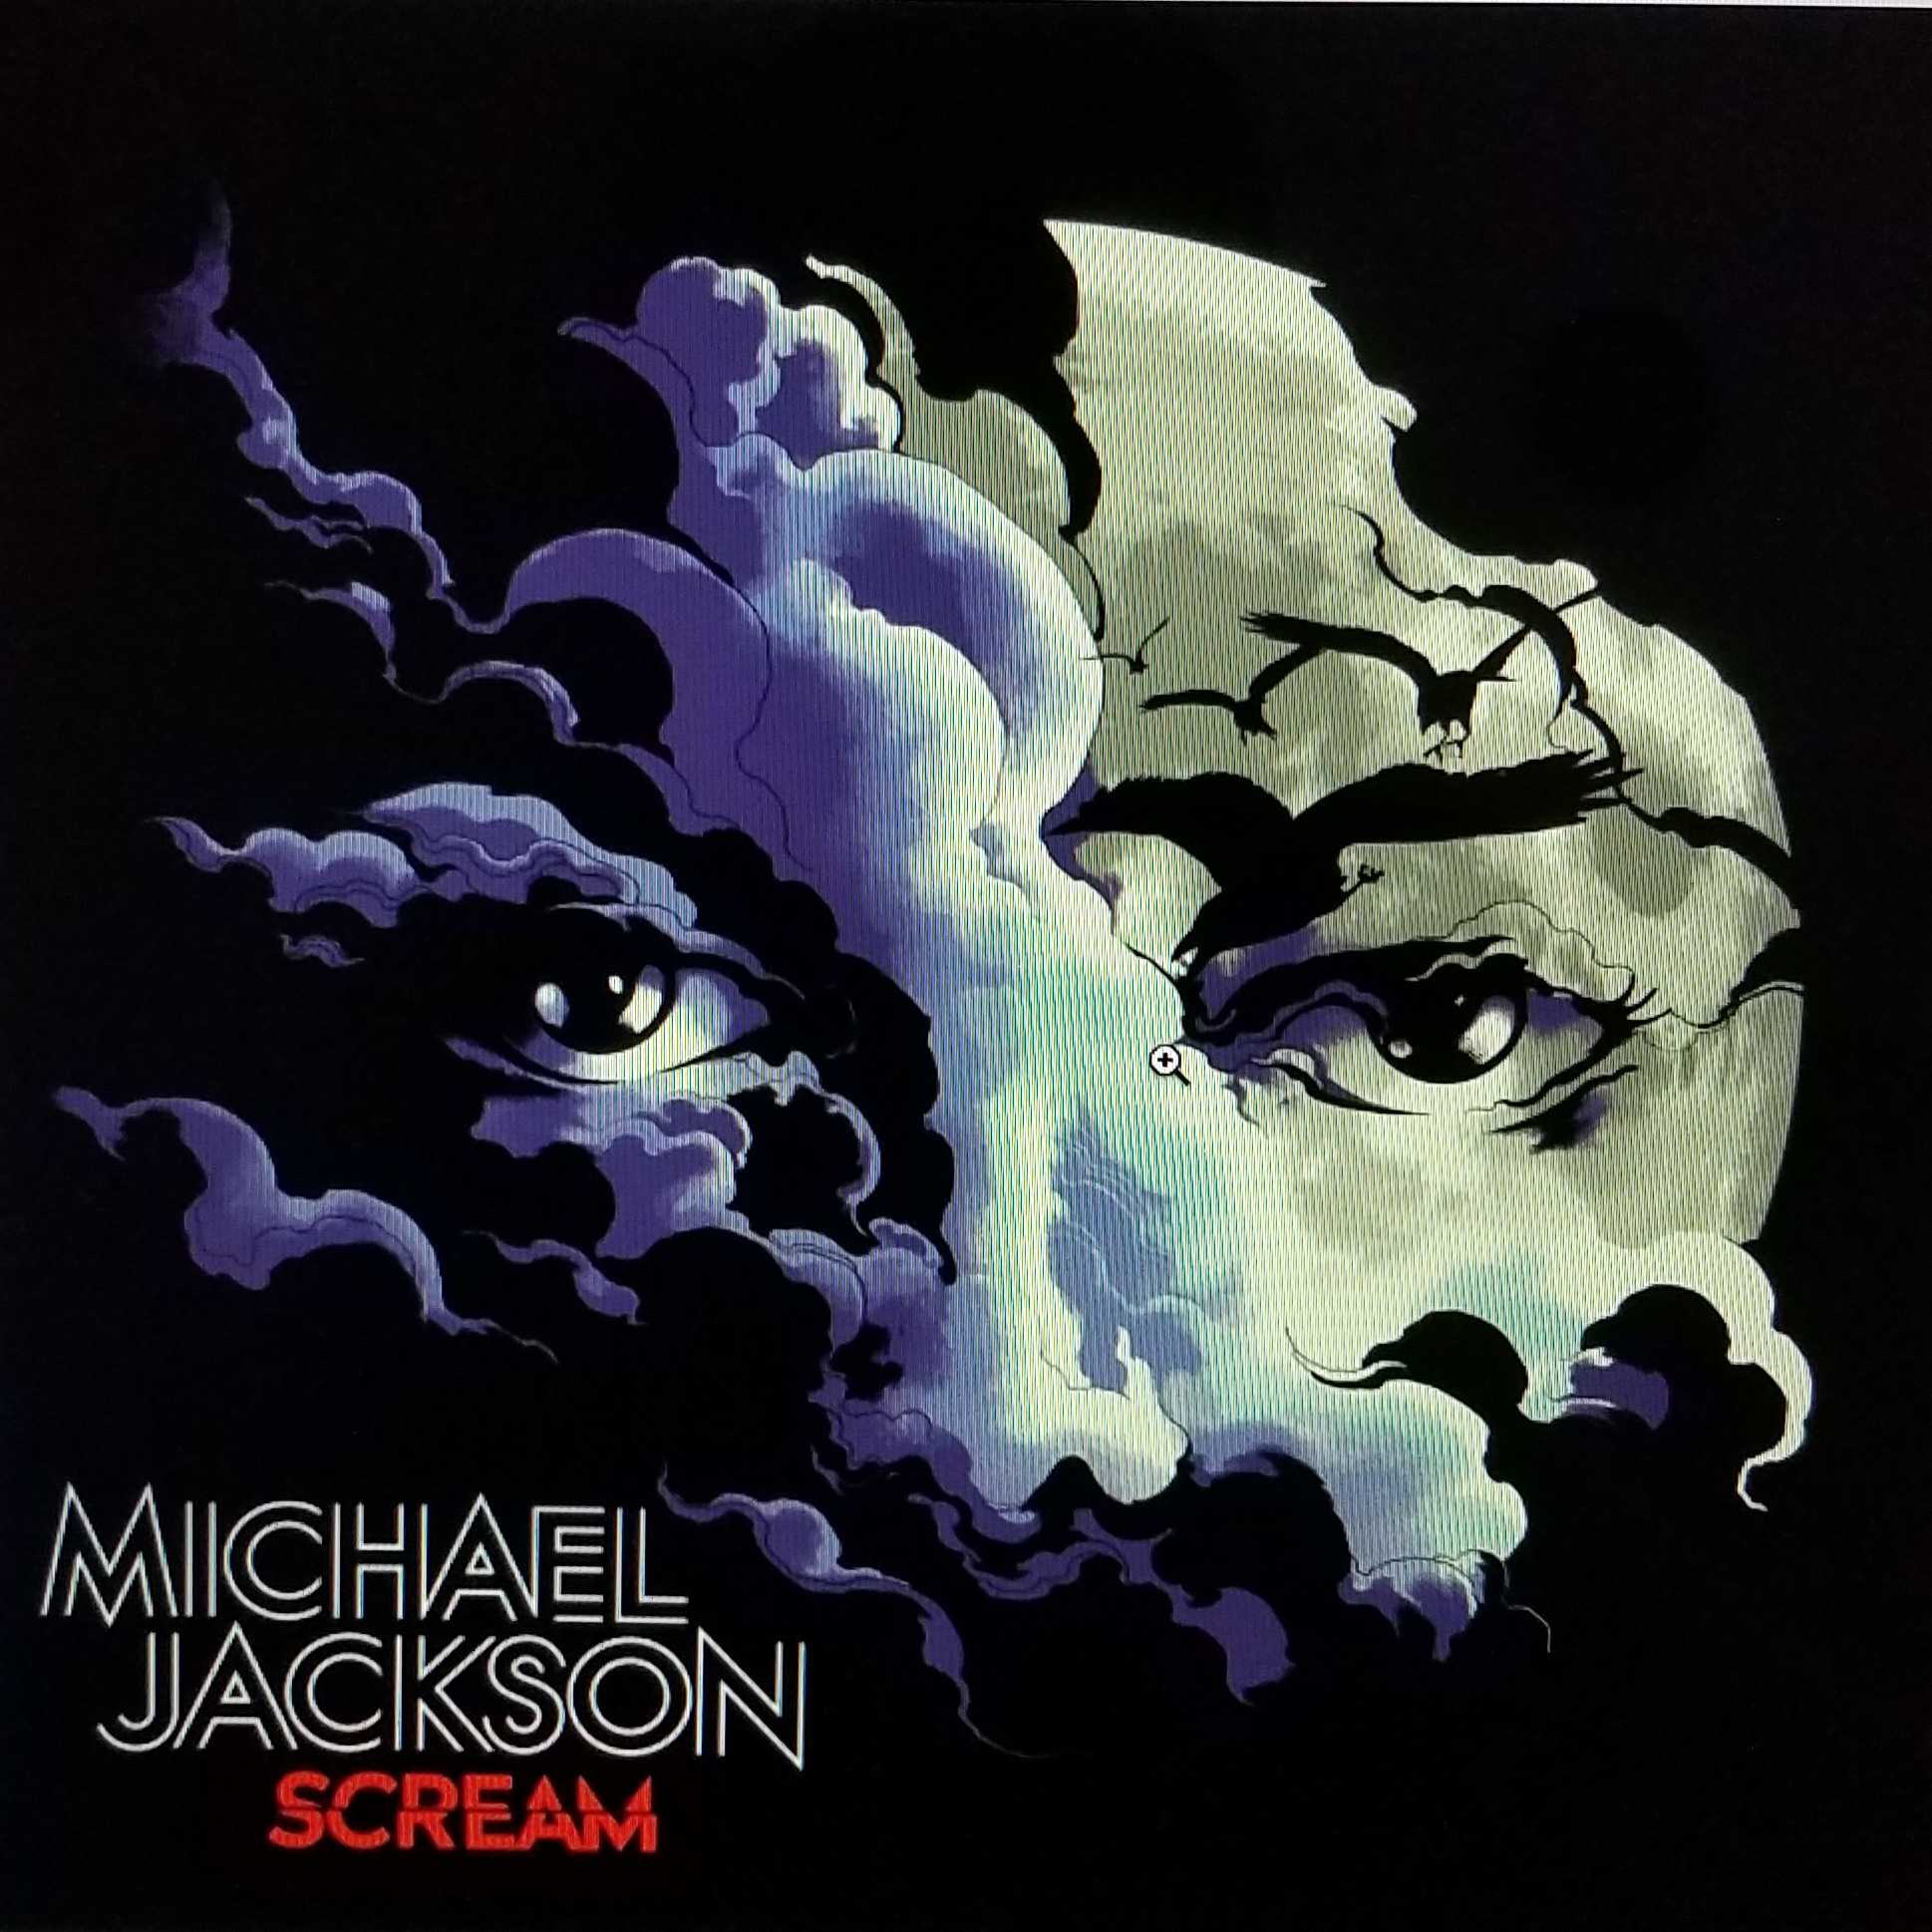 GET YOUR NERD ON MUSIC NEWS Sep 17, 2017: MJ SCREAM SEPT 29, AND WHY NOT THESE BONUS TRACKS